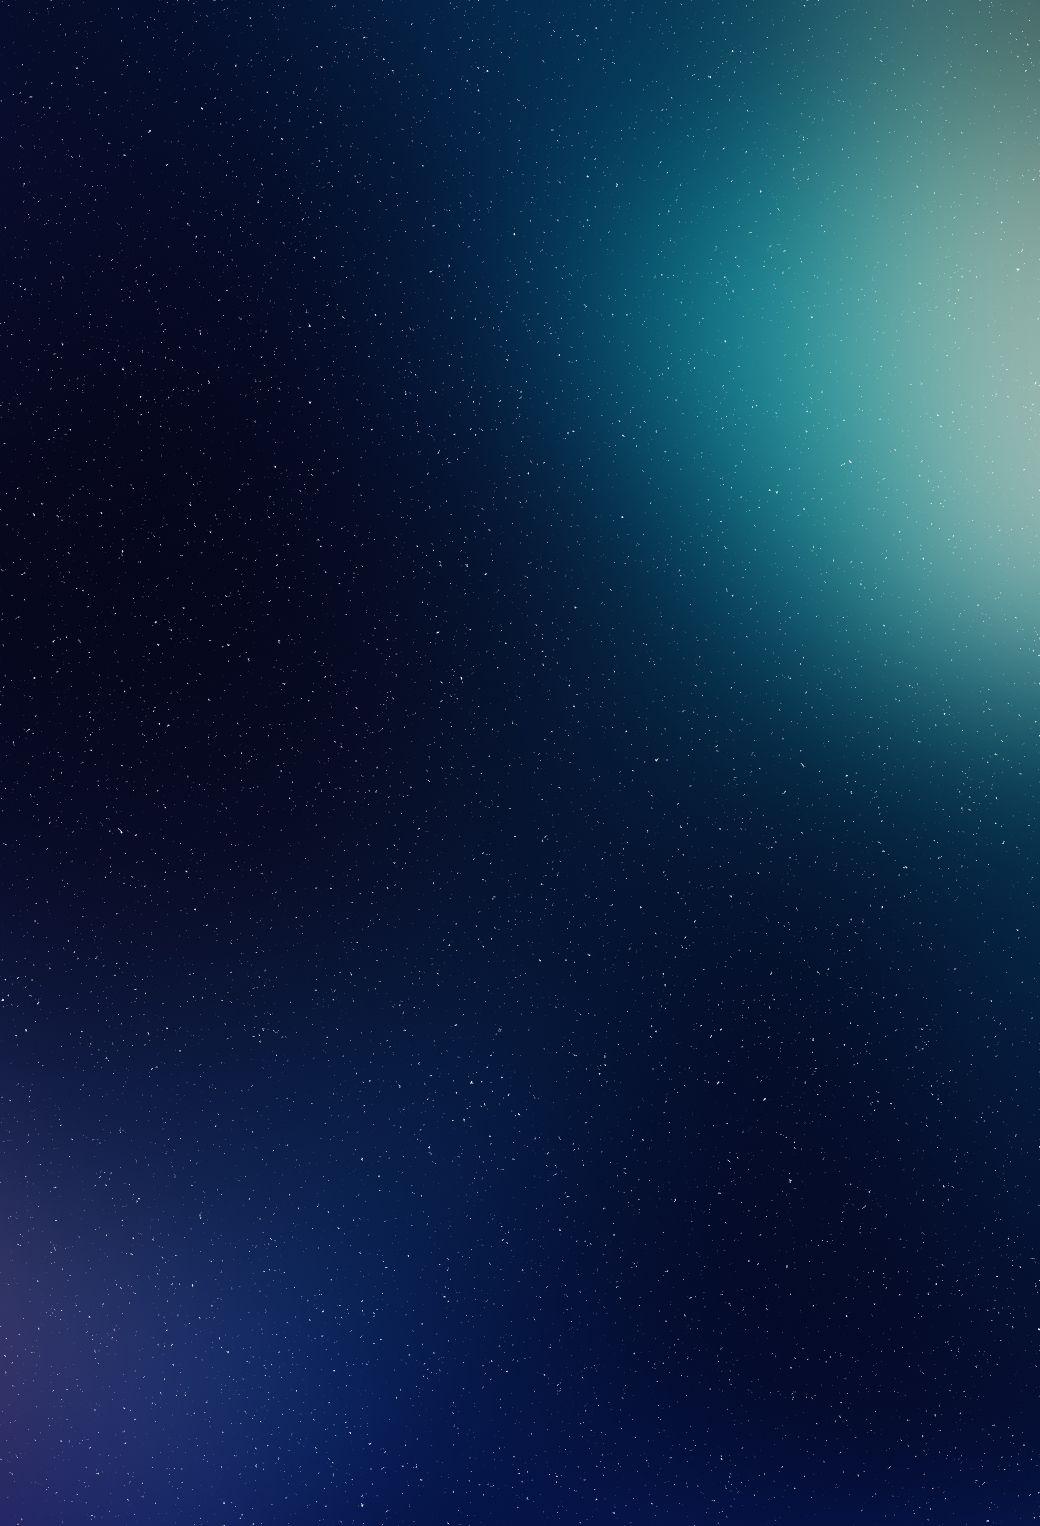 Best Dynamic Retina Space Wallpaper For iPhone 5s. mobilecrazies